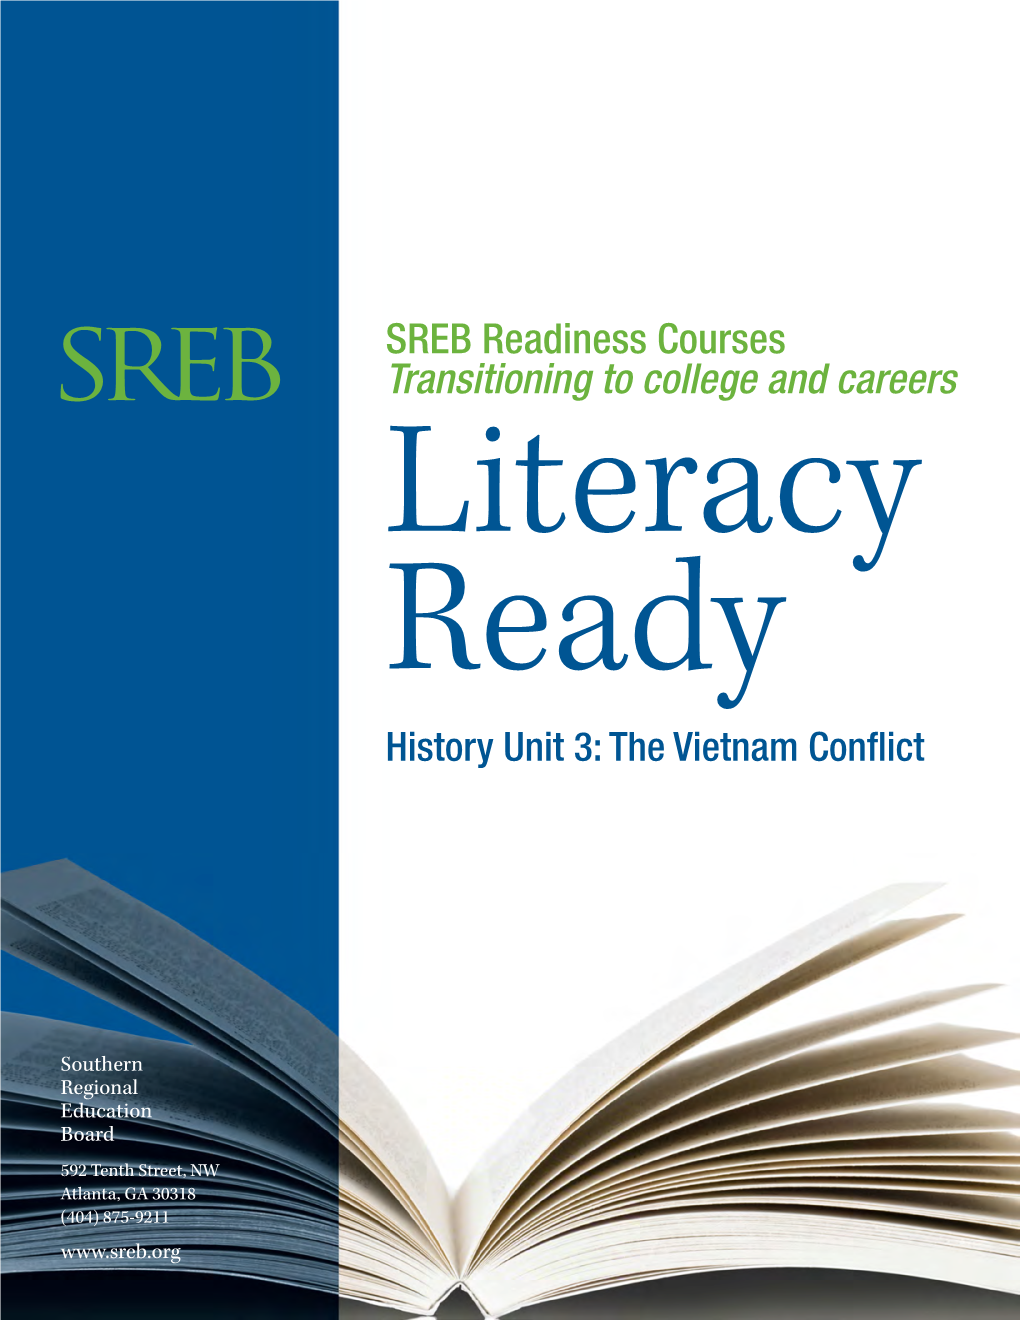 SREB Readiness Courses Transitioning to College and Careers Literacy Ready History Unit 3: the Vietnam Conflict